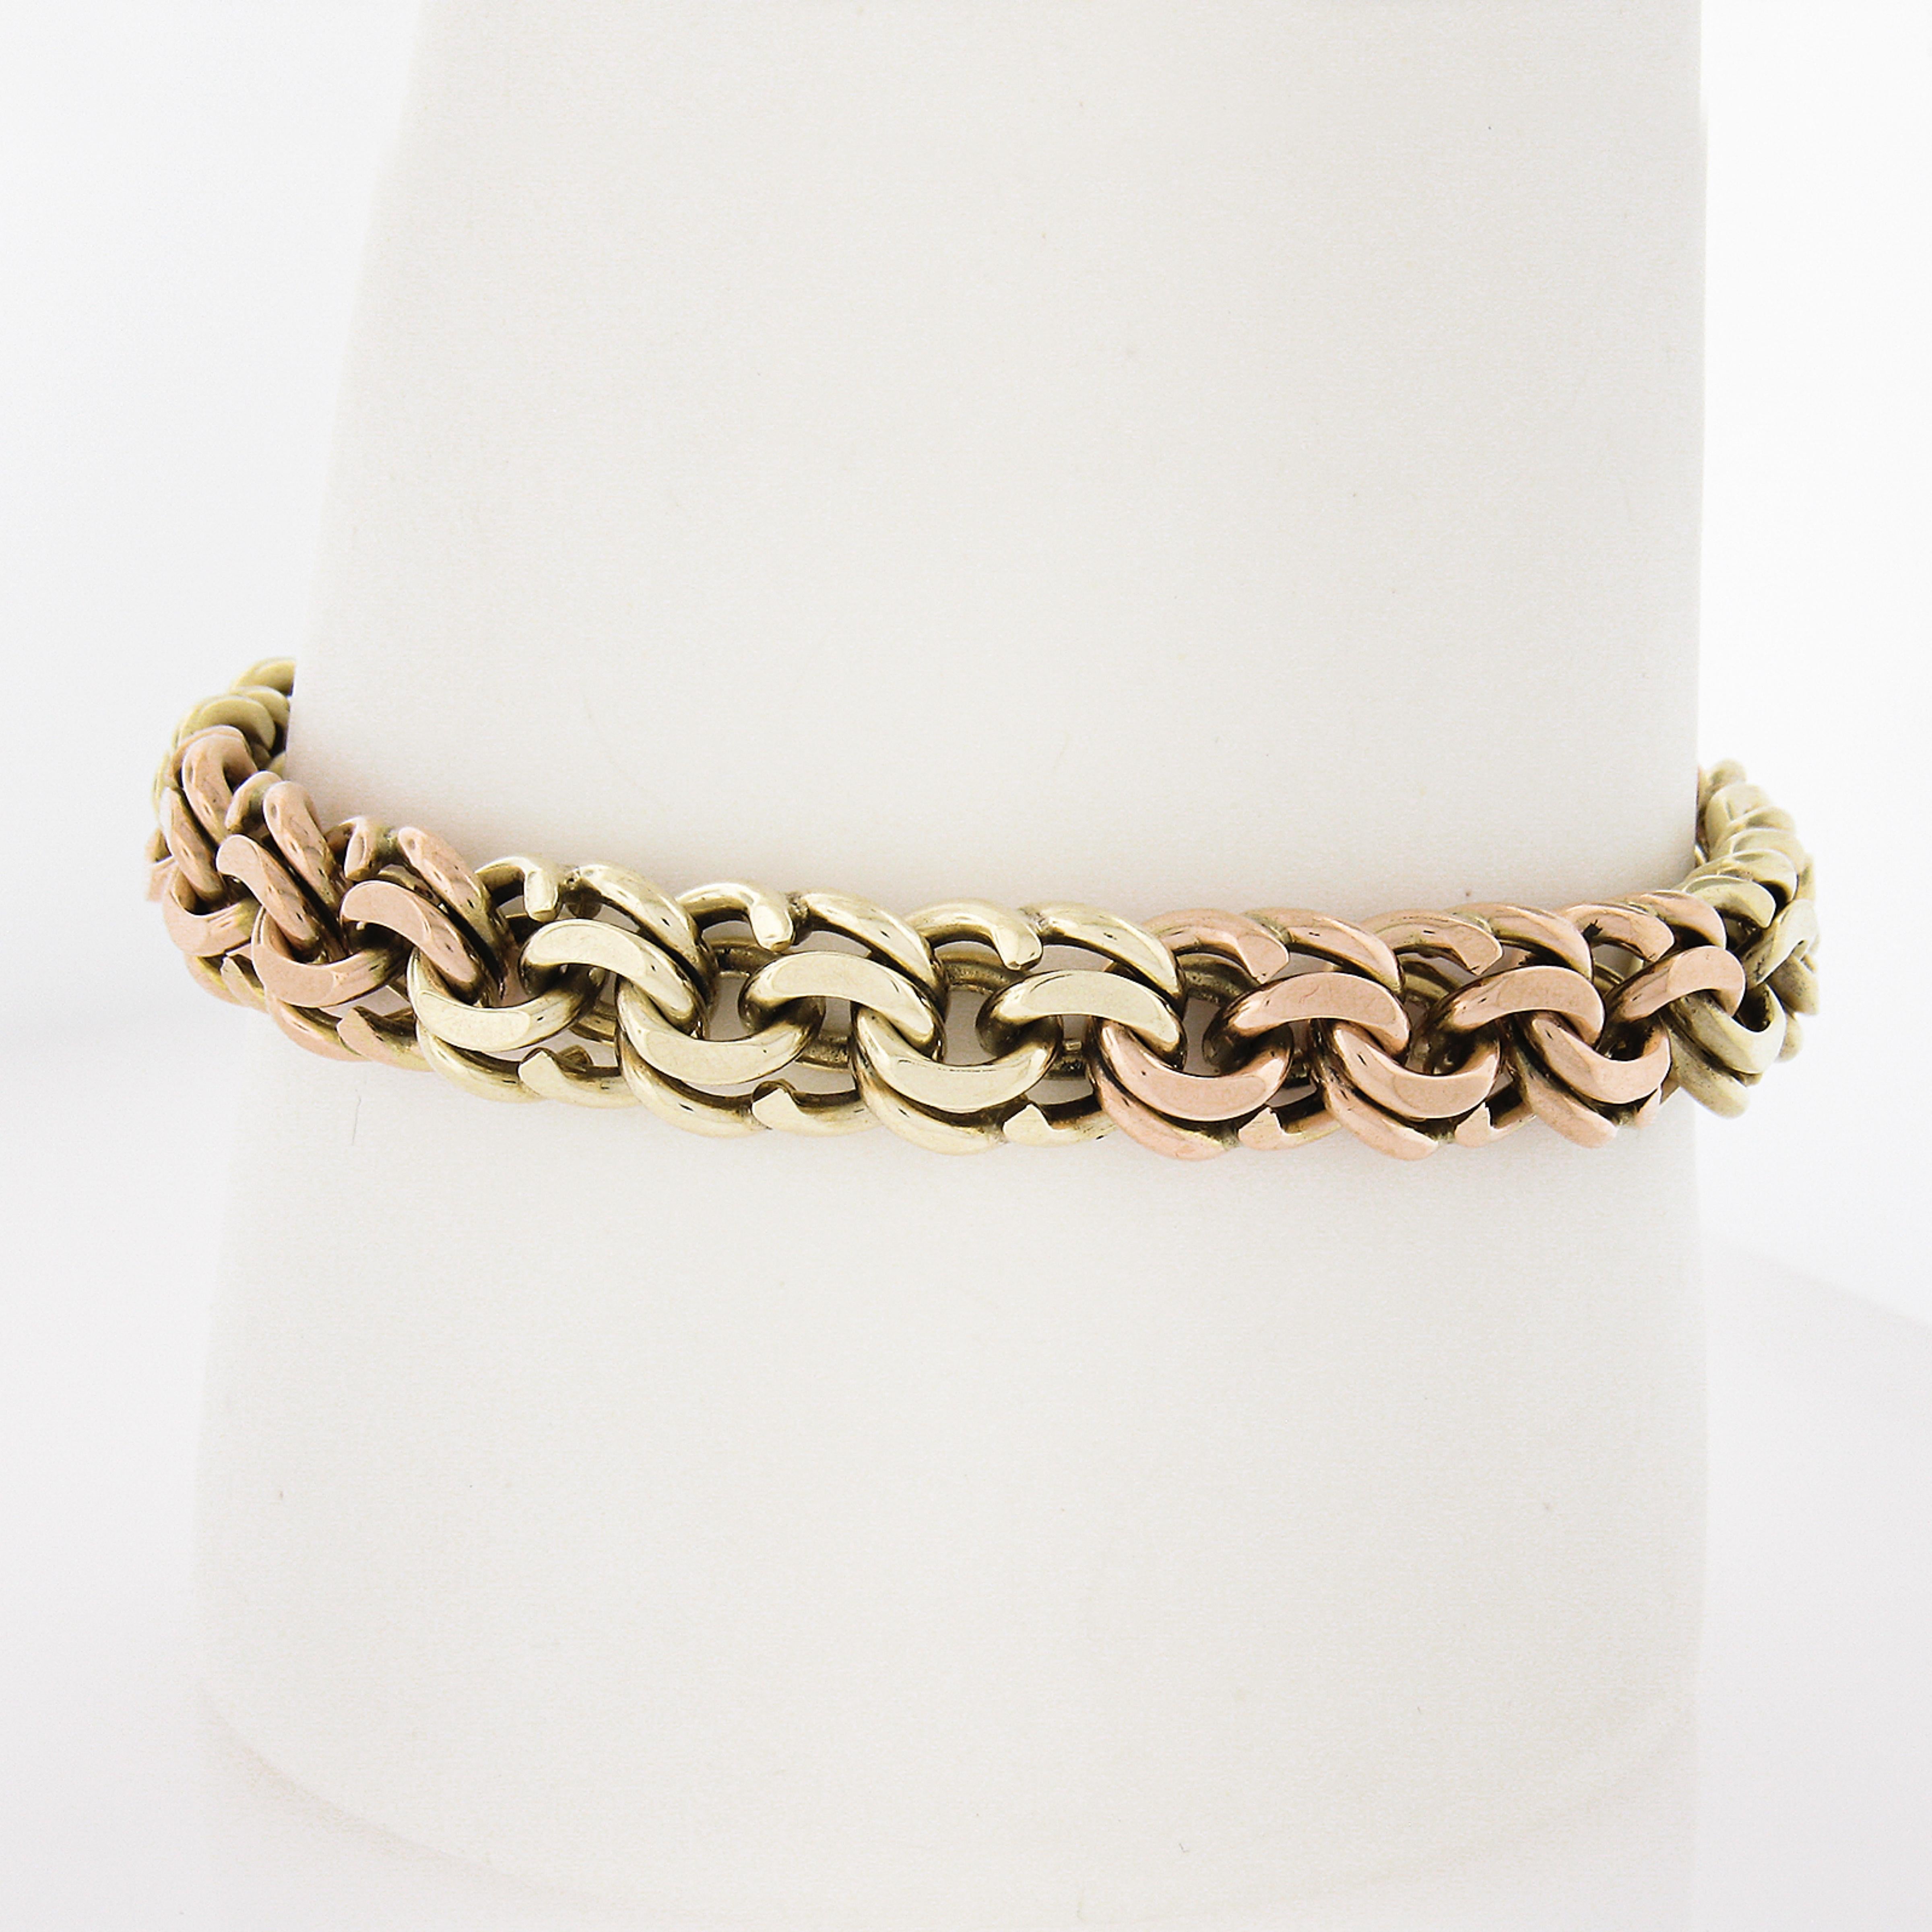 Material: Solid 14k Green & Rose Gold
Weight: 36.59 Grams
Chain Type: Dual Curb Link
Chain Length: Measures 7.5 inches next to a ruler. Will fit a 7 Inch wrist
Clasp: Lobster Claw Clasp
Width: 8.9mm (0.35 in)
Thickness: 4.7mm (rise off the